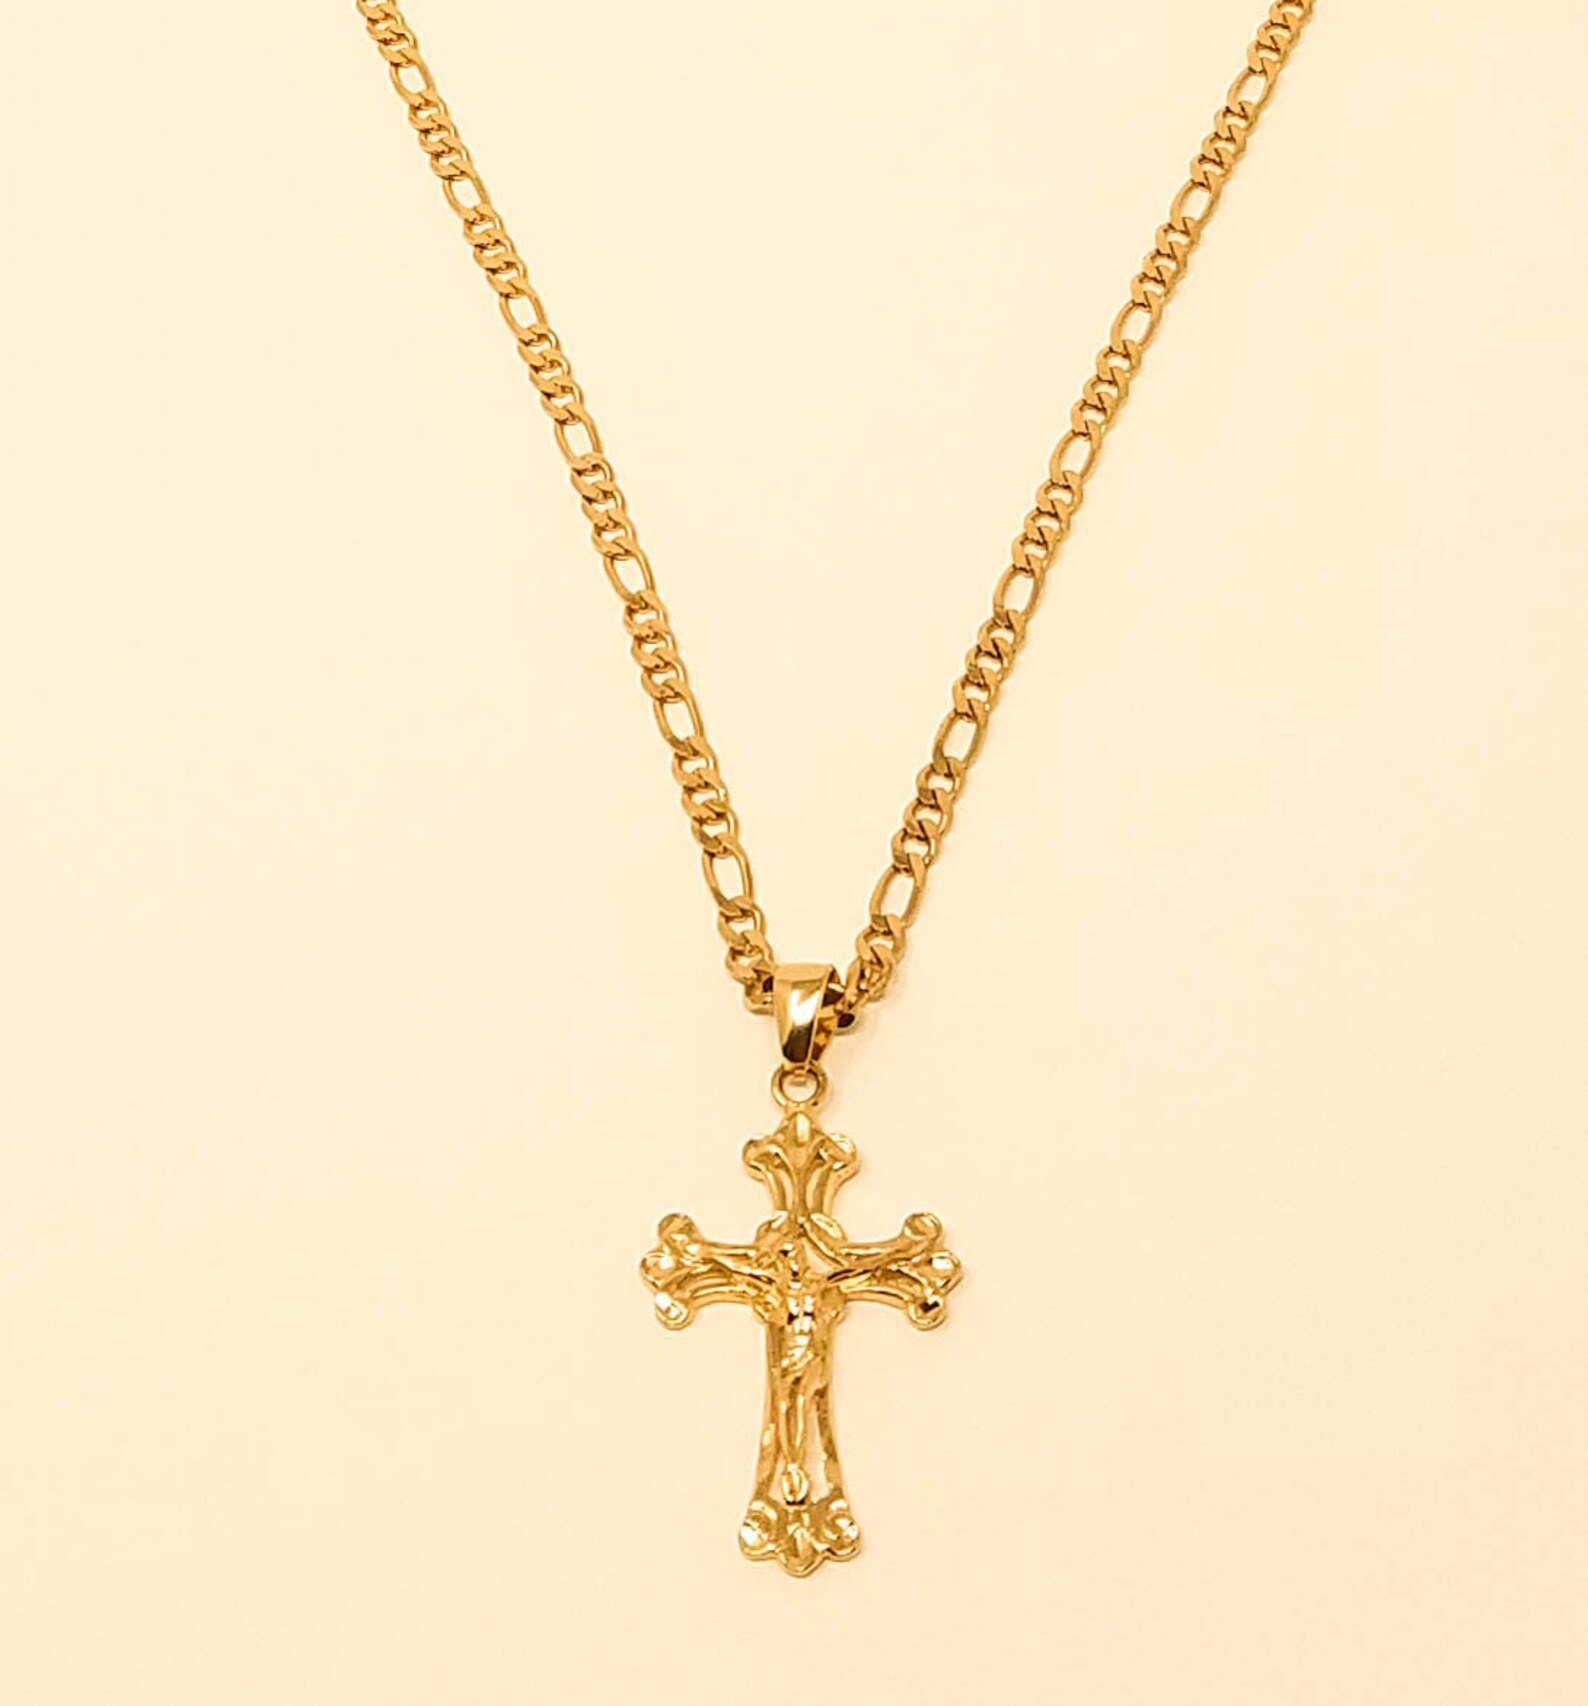 14k Gold Filled Necklace With Cross Pendant/ Christian - Etsy